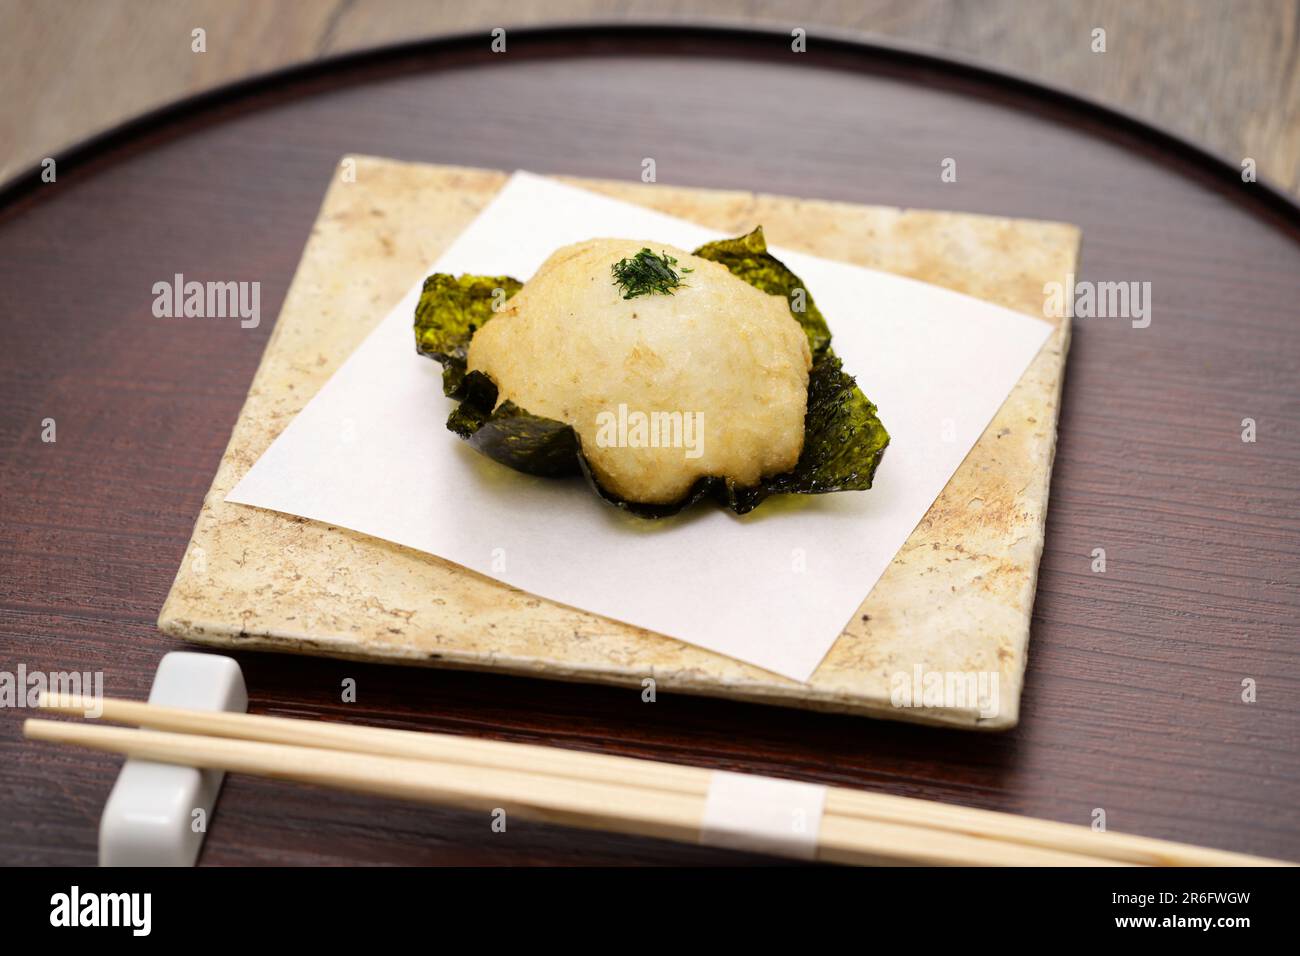 Yamaimo no isobe-age ( Grate Japanese yam and put it on top of Nori seaweed and then deep-fried ), Japanese cuisine Stock Photo